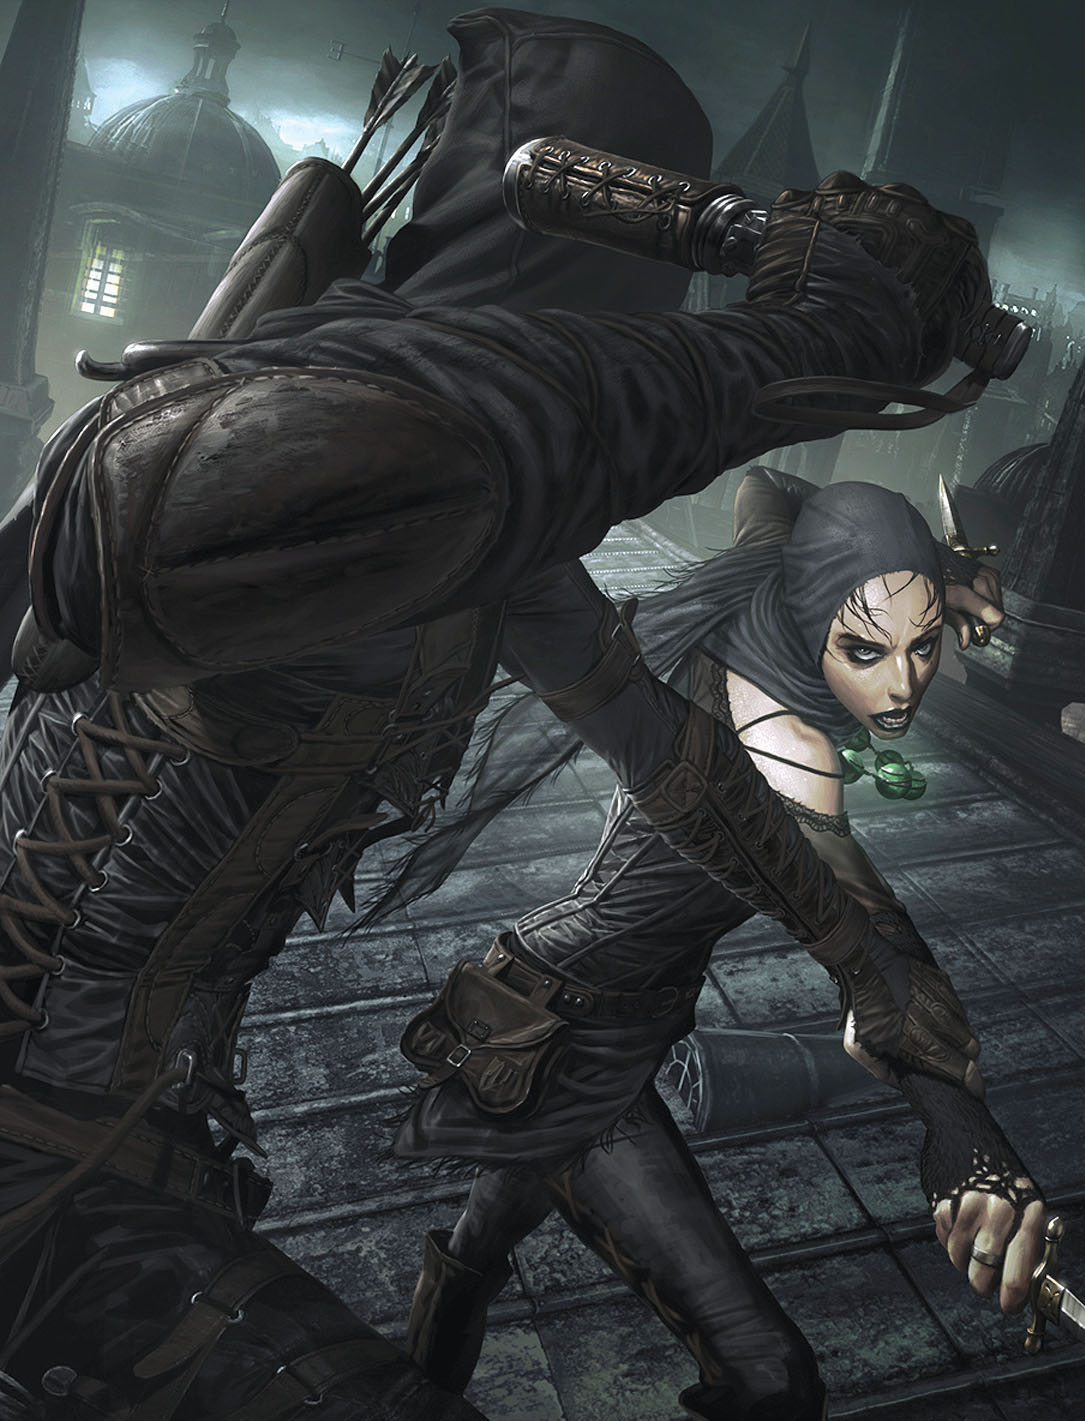 Fine Art: The Very Sneaky Art Of Thief